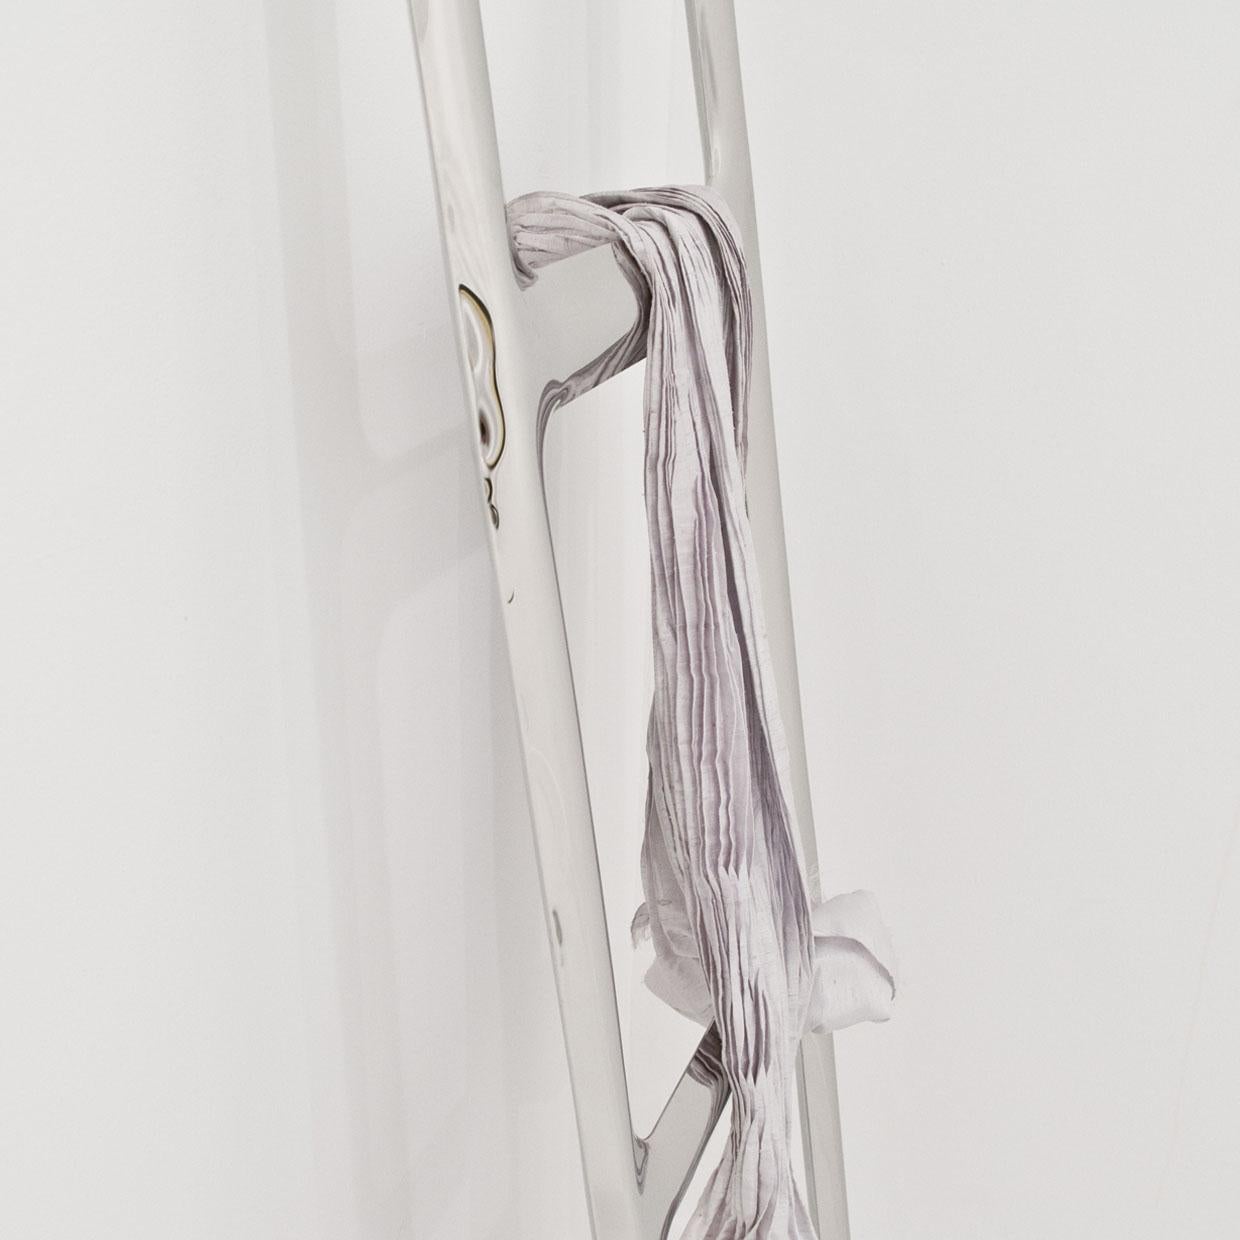 Drab Hanger Polished Stainless Steel Hanger by Zieta In New Condition For Sale In Beverly Hills, CA